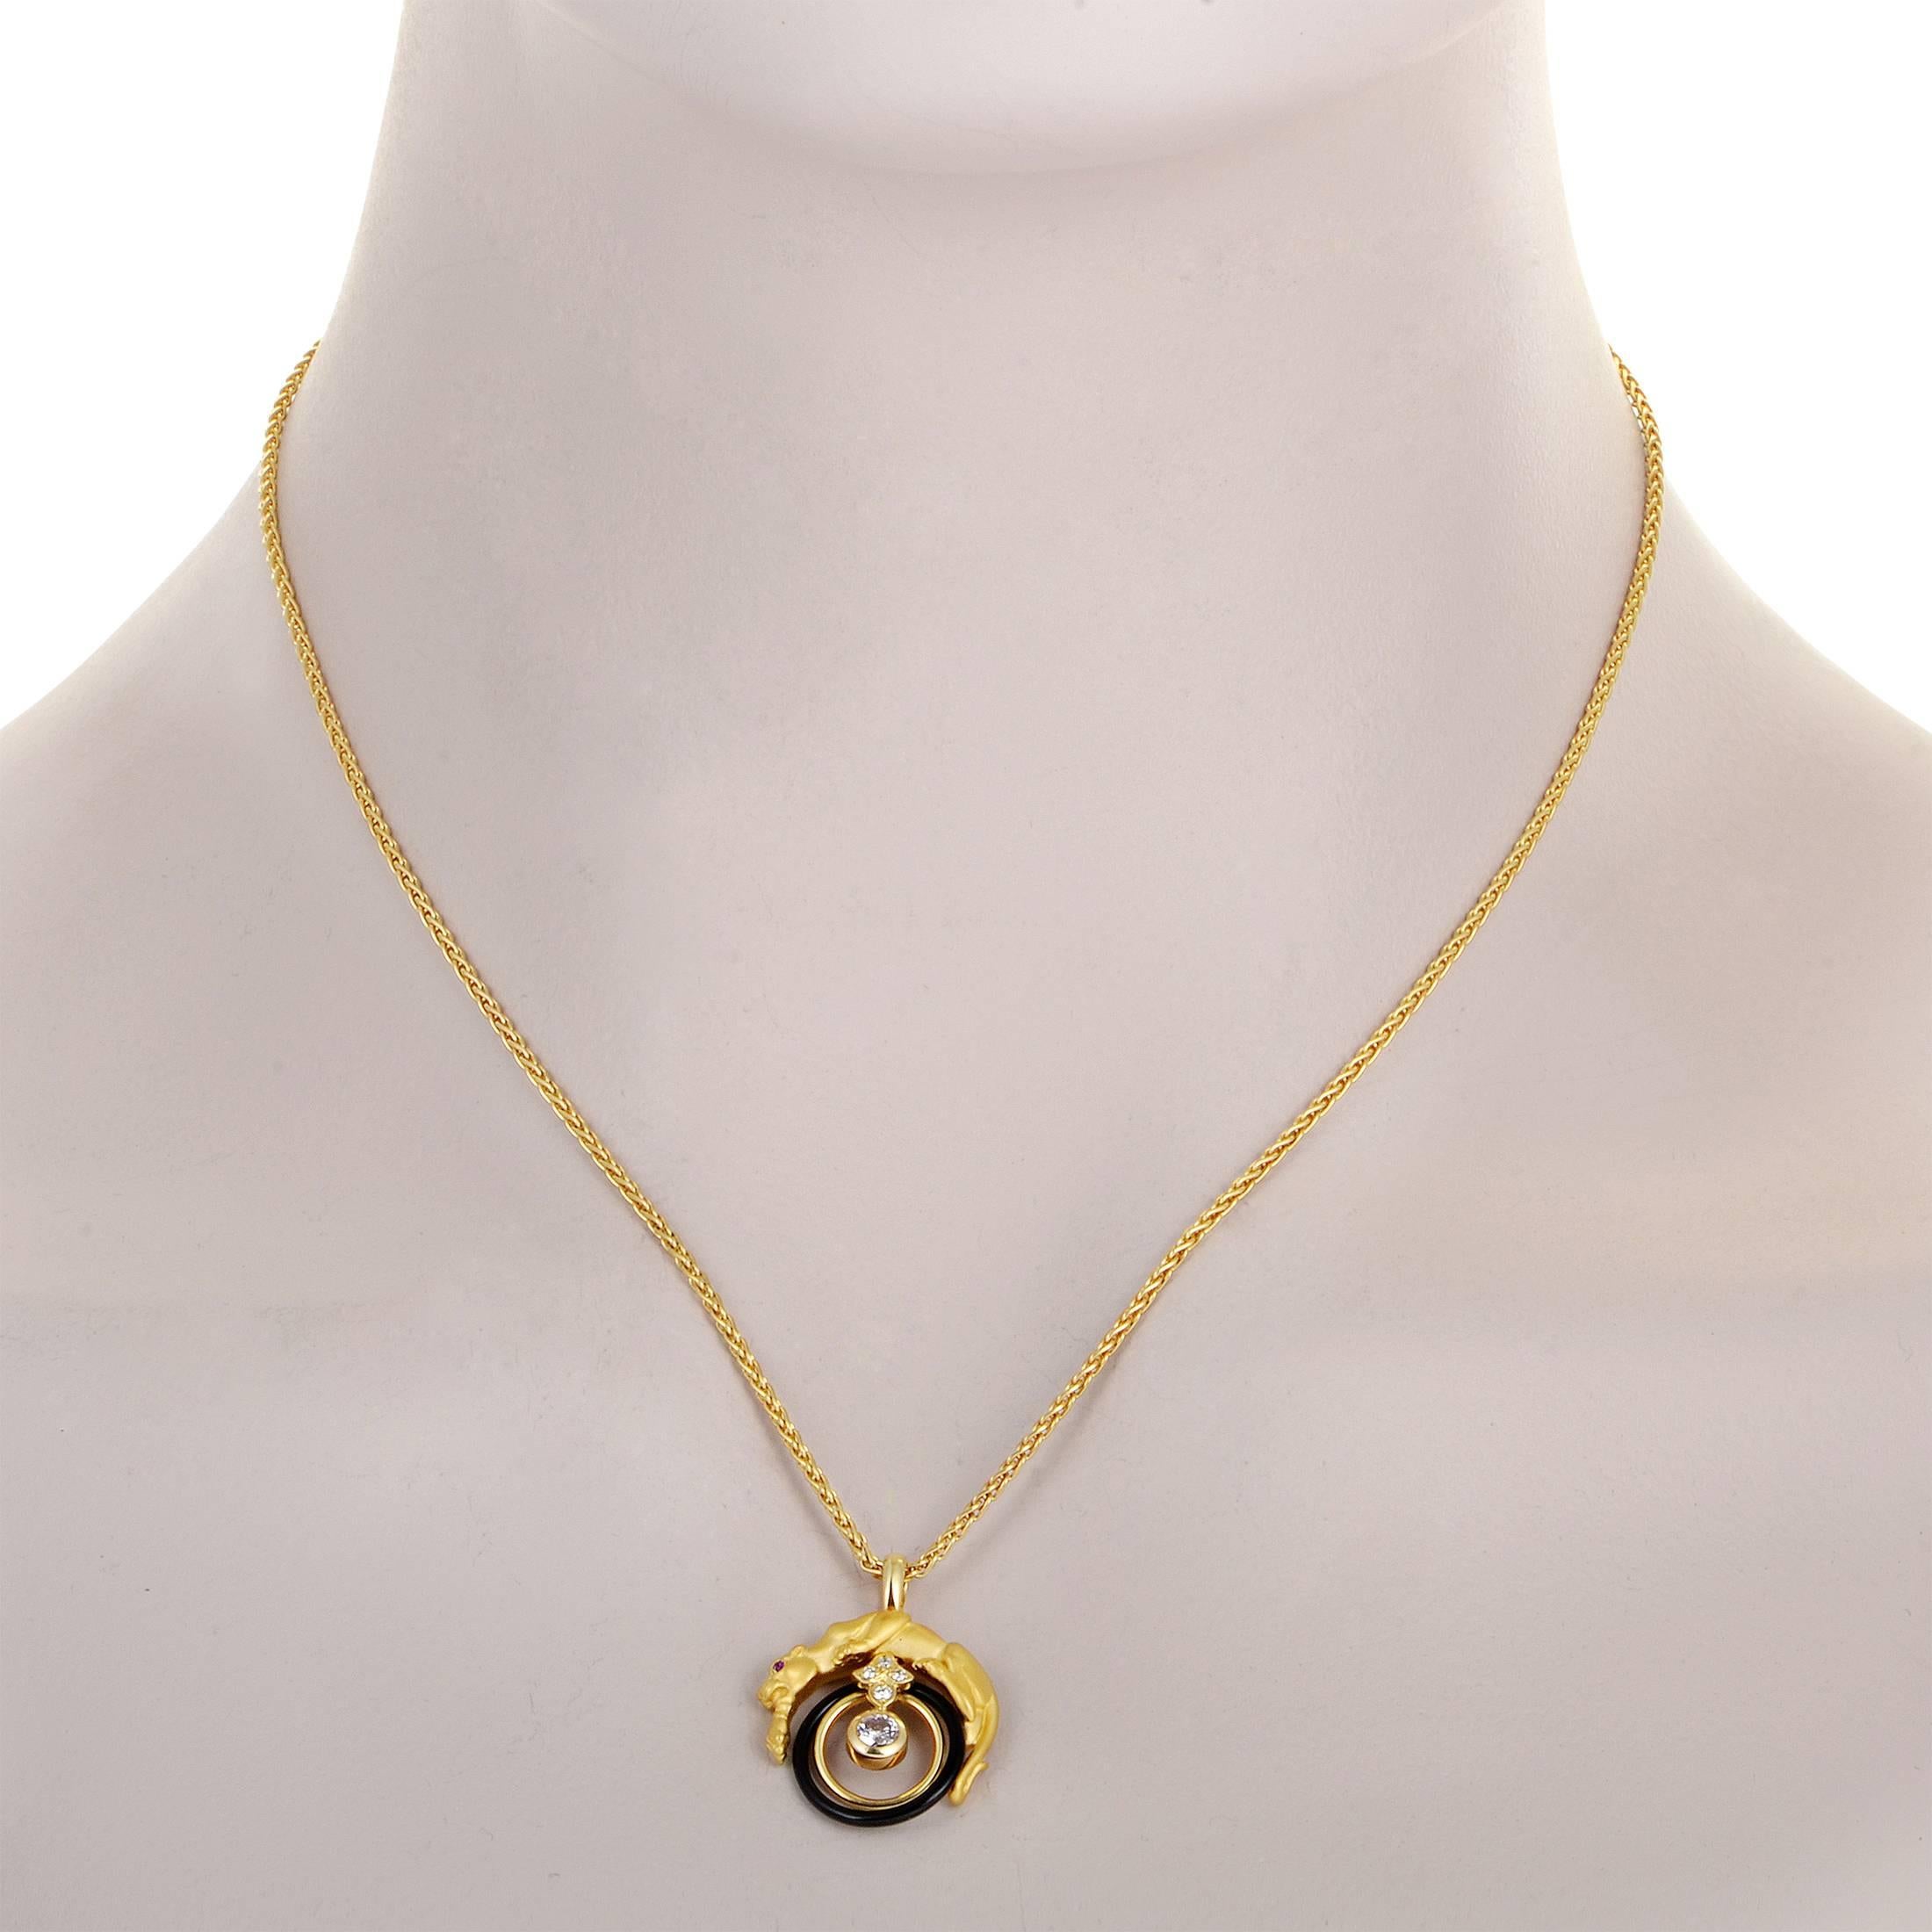 Boasting their instantly recognizable and esteemed motif of a majestic panther, Carrera y Carrera present this fabulous 18K yellow gold necklace which features a stunning ring-shaped onyx, a ruby, and sparkling diamonds totaling 0.22ct in its